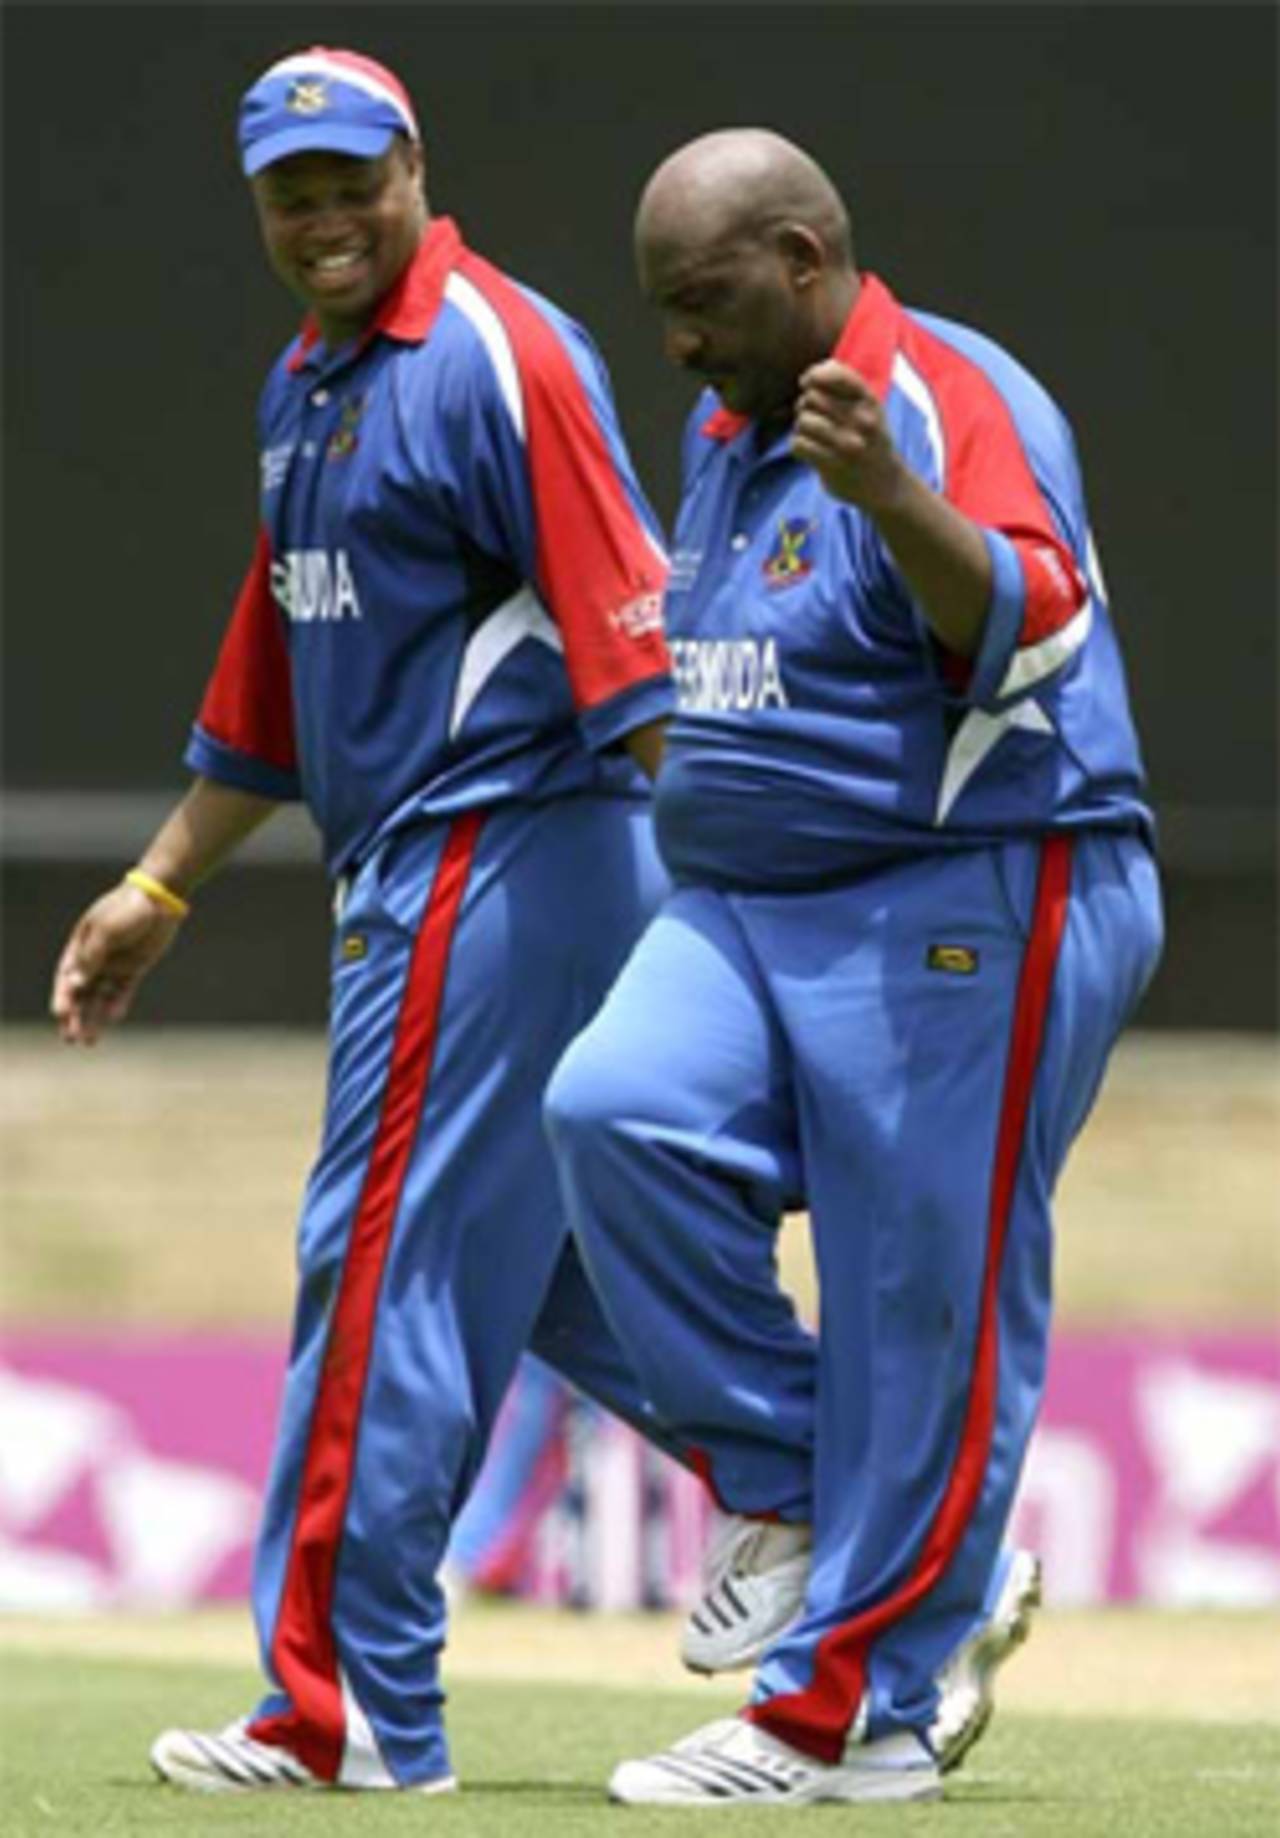 Dwayne Leverock, Bermuda's most colourful character, does a jig after picking up the wicket of Kumar Sangakkara, Bermuda v Sri Lanka, Group B, Port of Spain, March 15, 2007